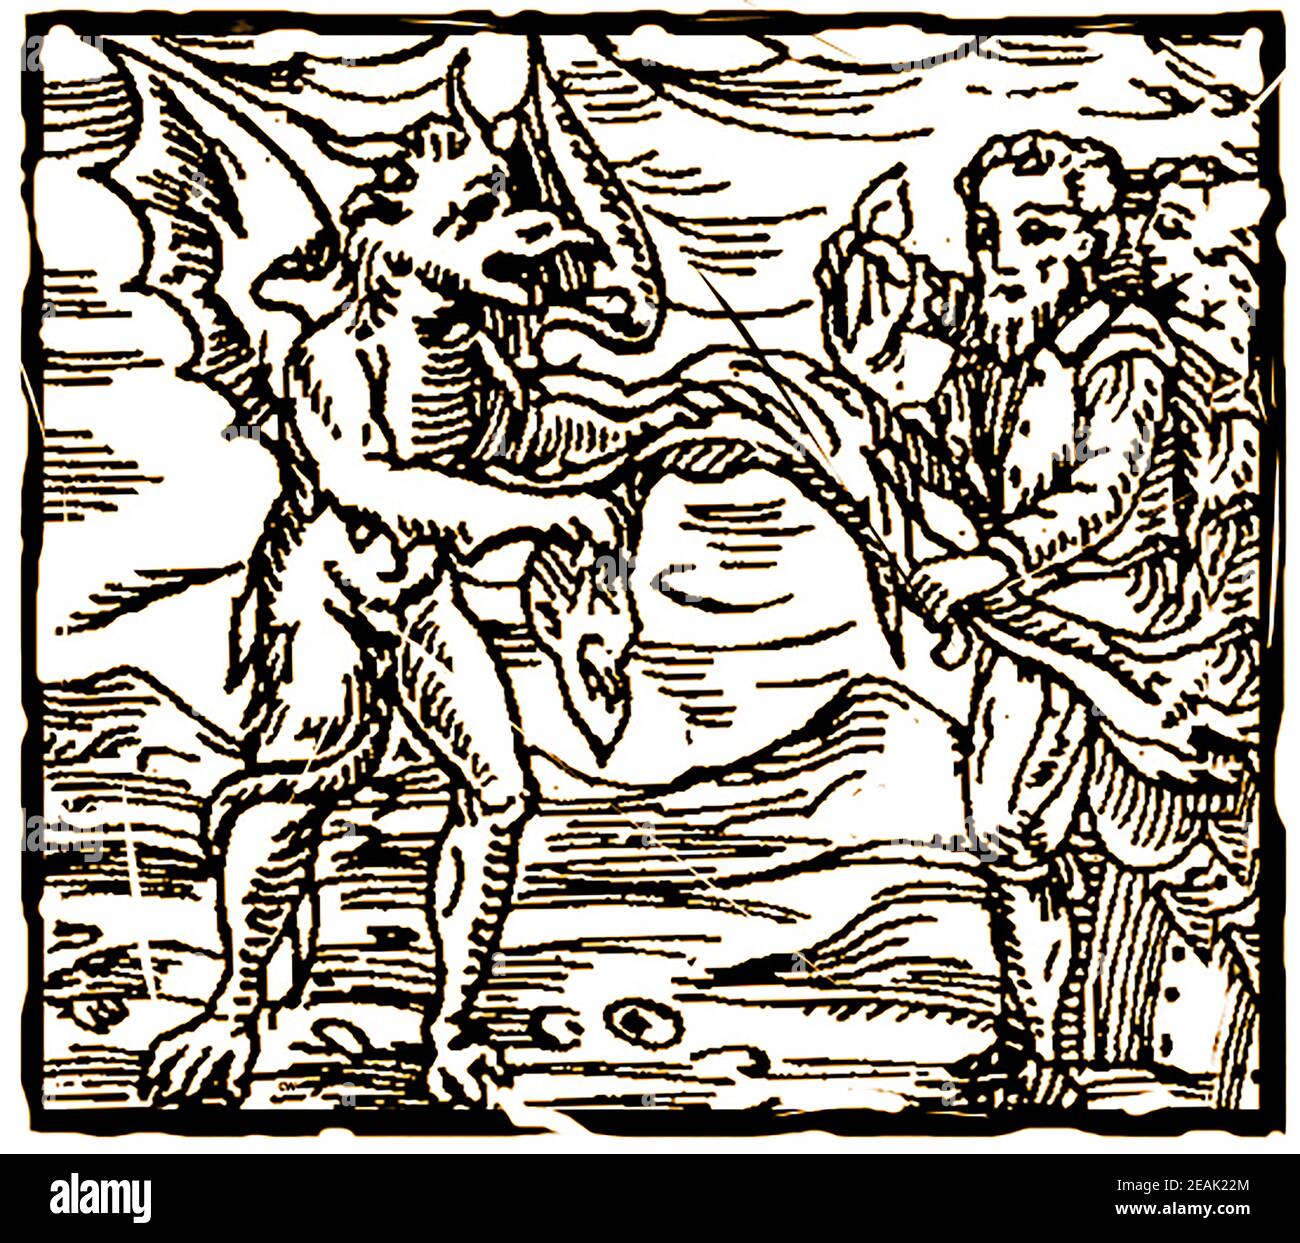 A 17th century woodcut engraving showing the evils of a belief in magic and  demonology for those following conventional religion. In this scene a man is seen making a pact with the devil. Stock Photo